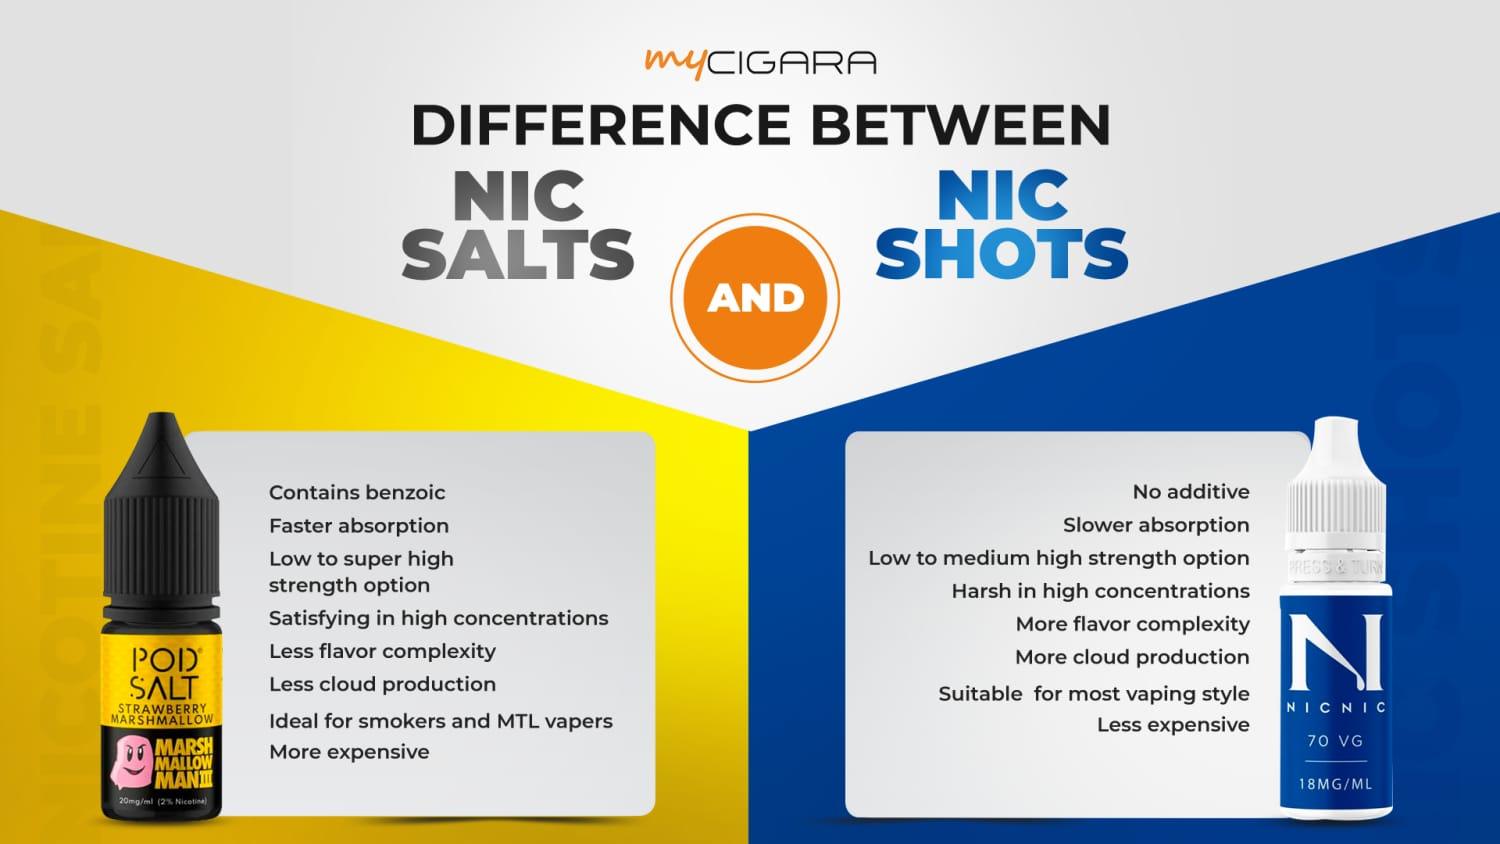 Difference Between Nic Salts and Nic Shots - Brand:NicNic, Category:E-Liquids, Sub Category:Nicotine Salts, Sub Category:Nicotine Shots